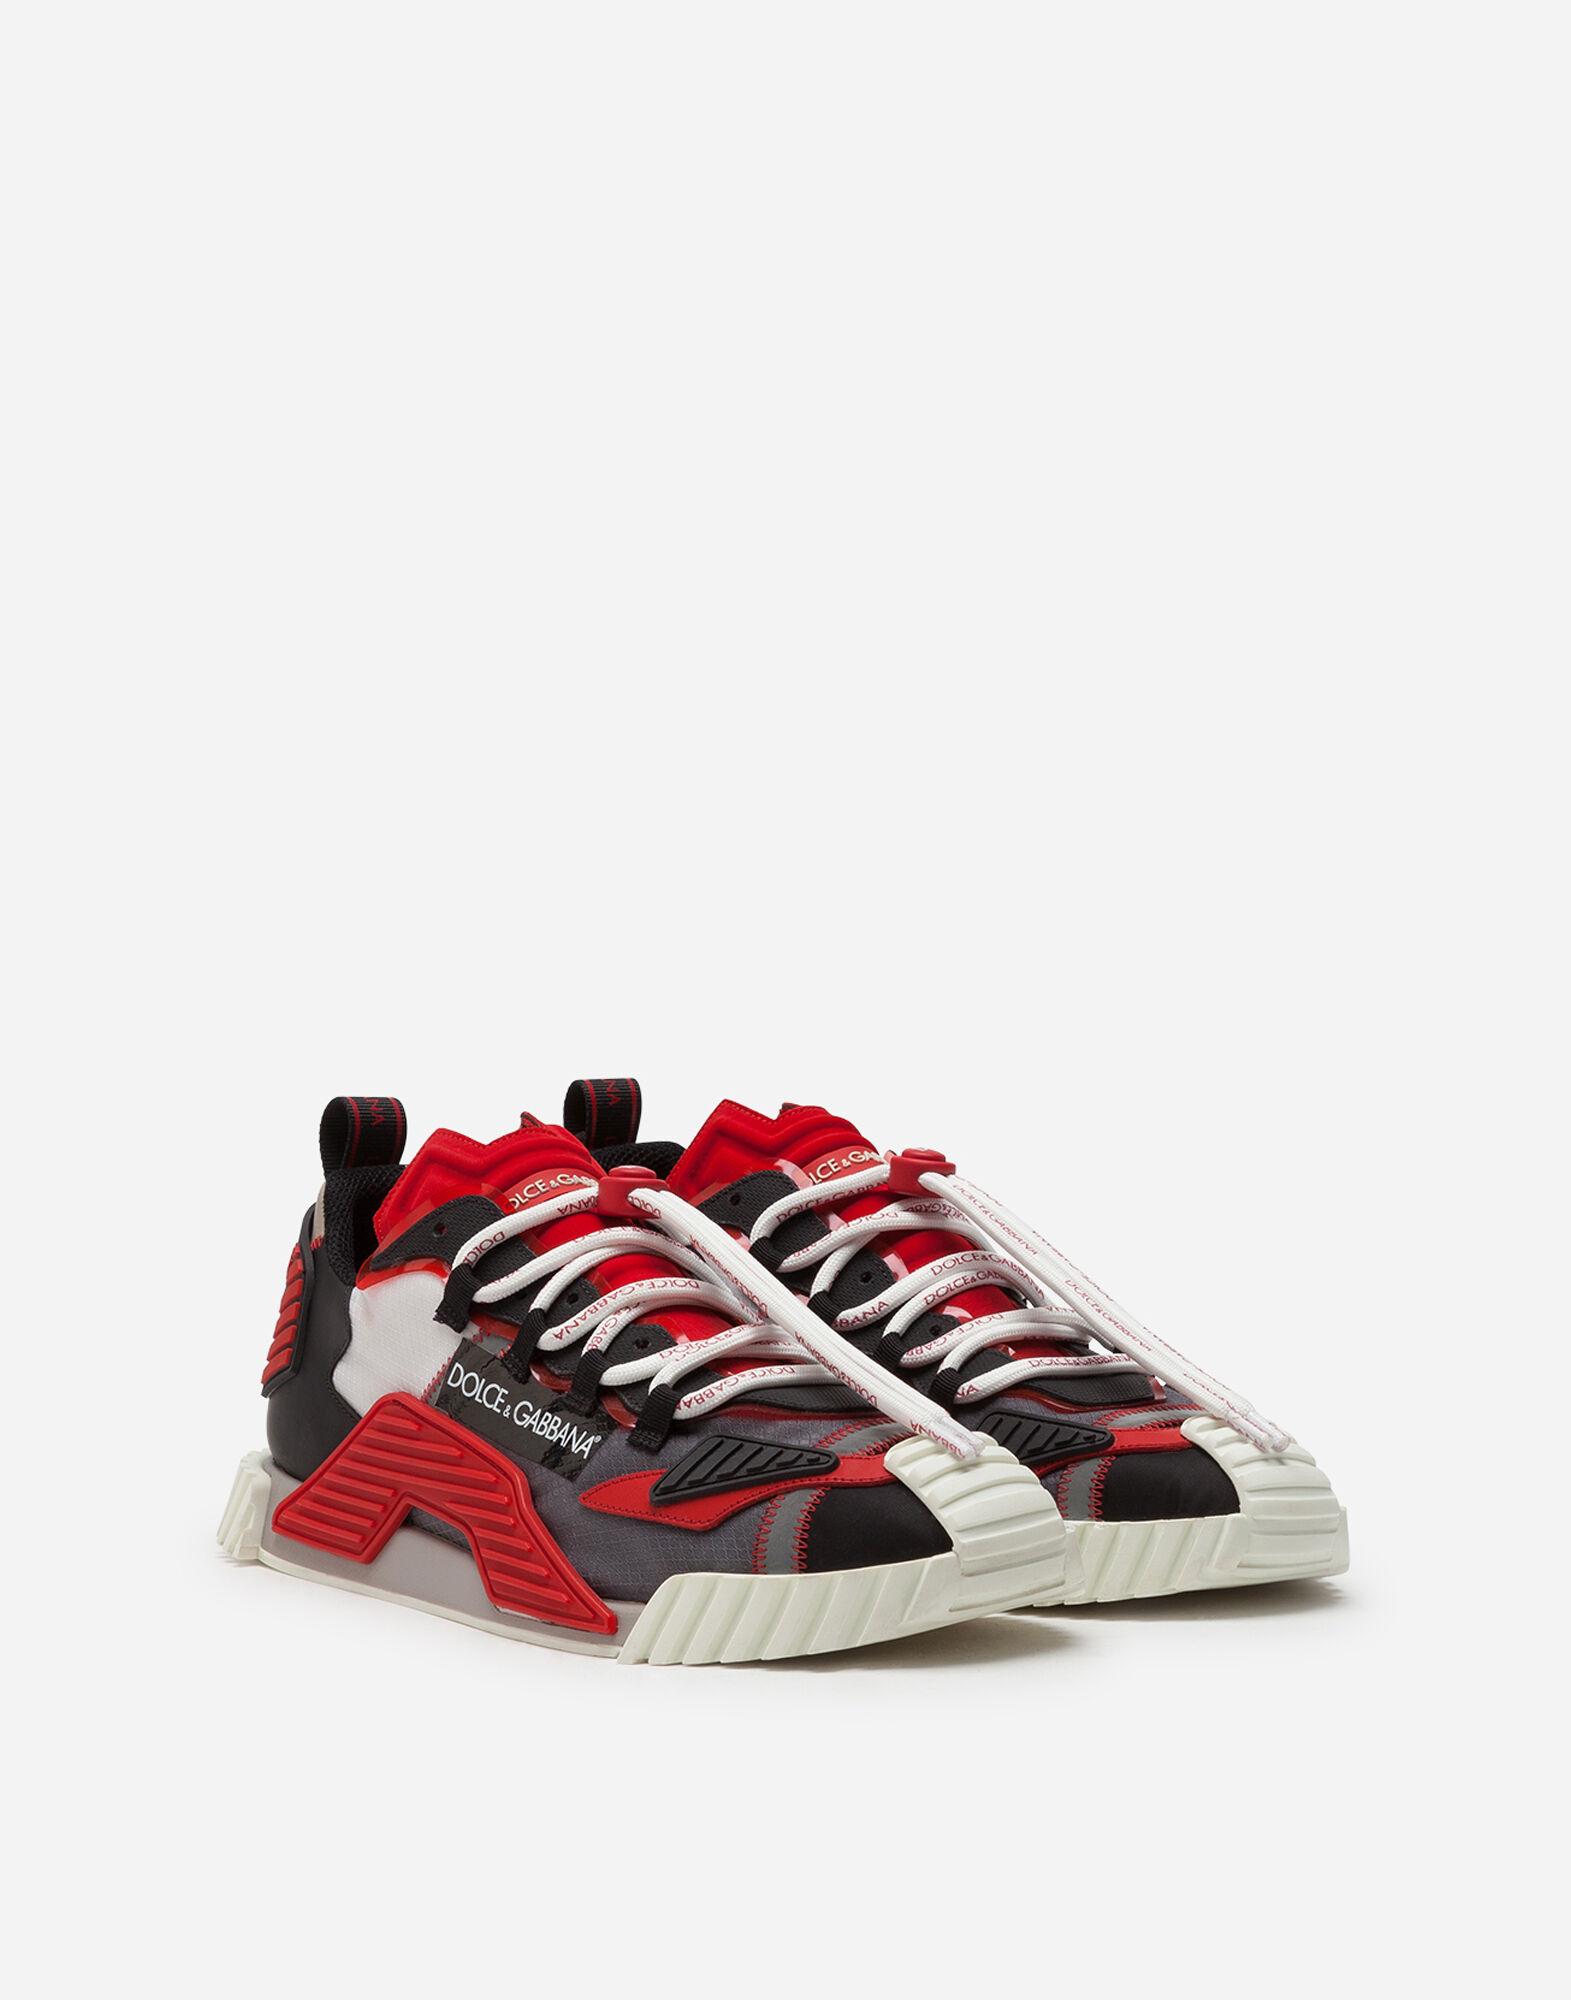 Dolce & Gabbana Suede Ns1 Sneakers In Mixed Materials in Red for Men - Lyst